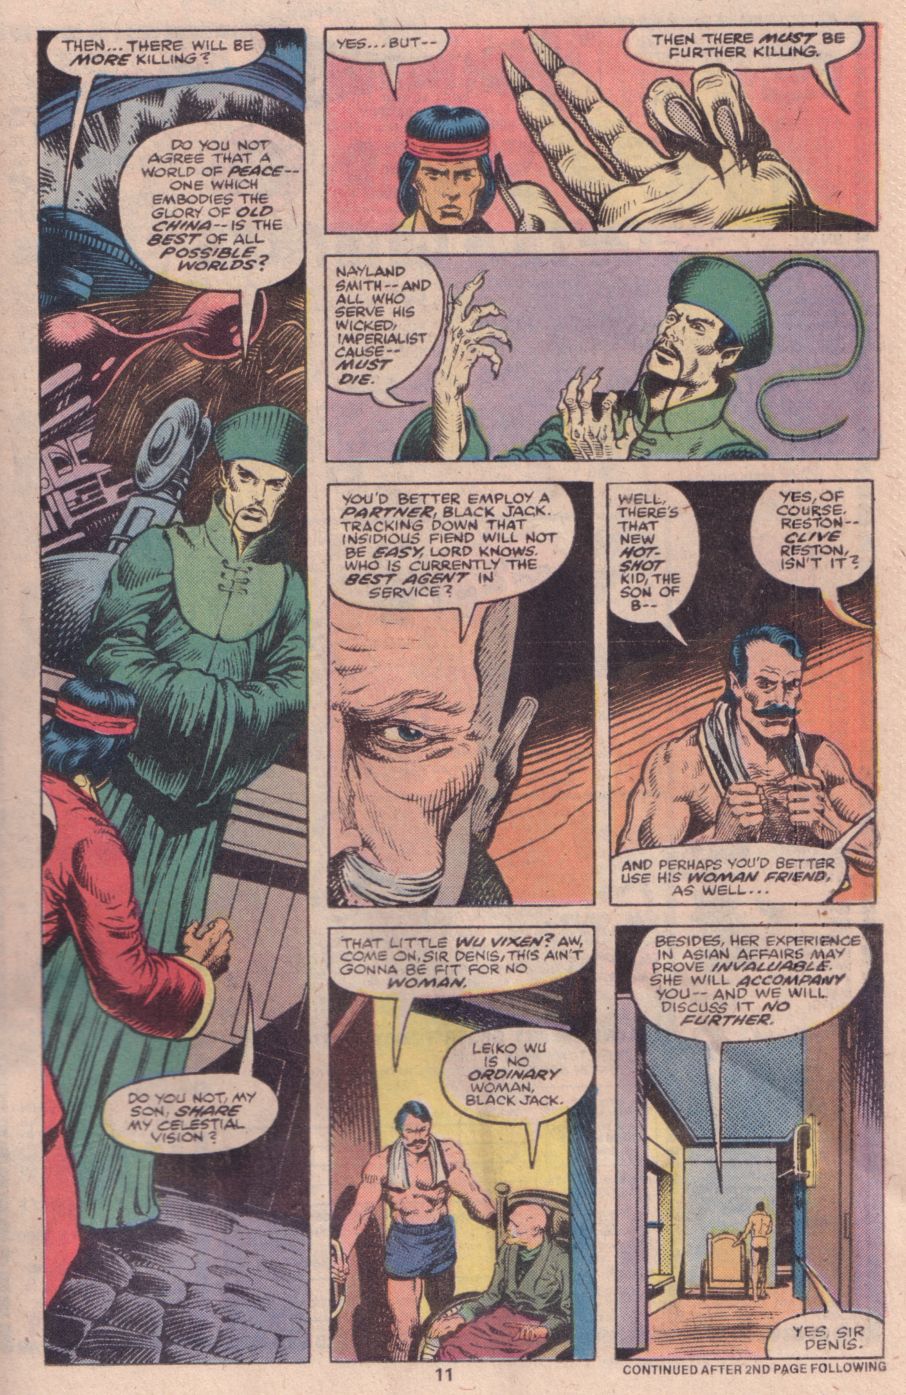 What If? (1977) issue 16 - Shang Chi Master of Kung Fu fought on The side of Fu Manchu - Page 10